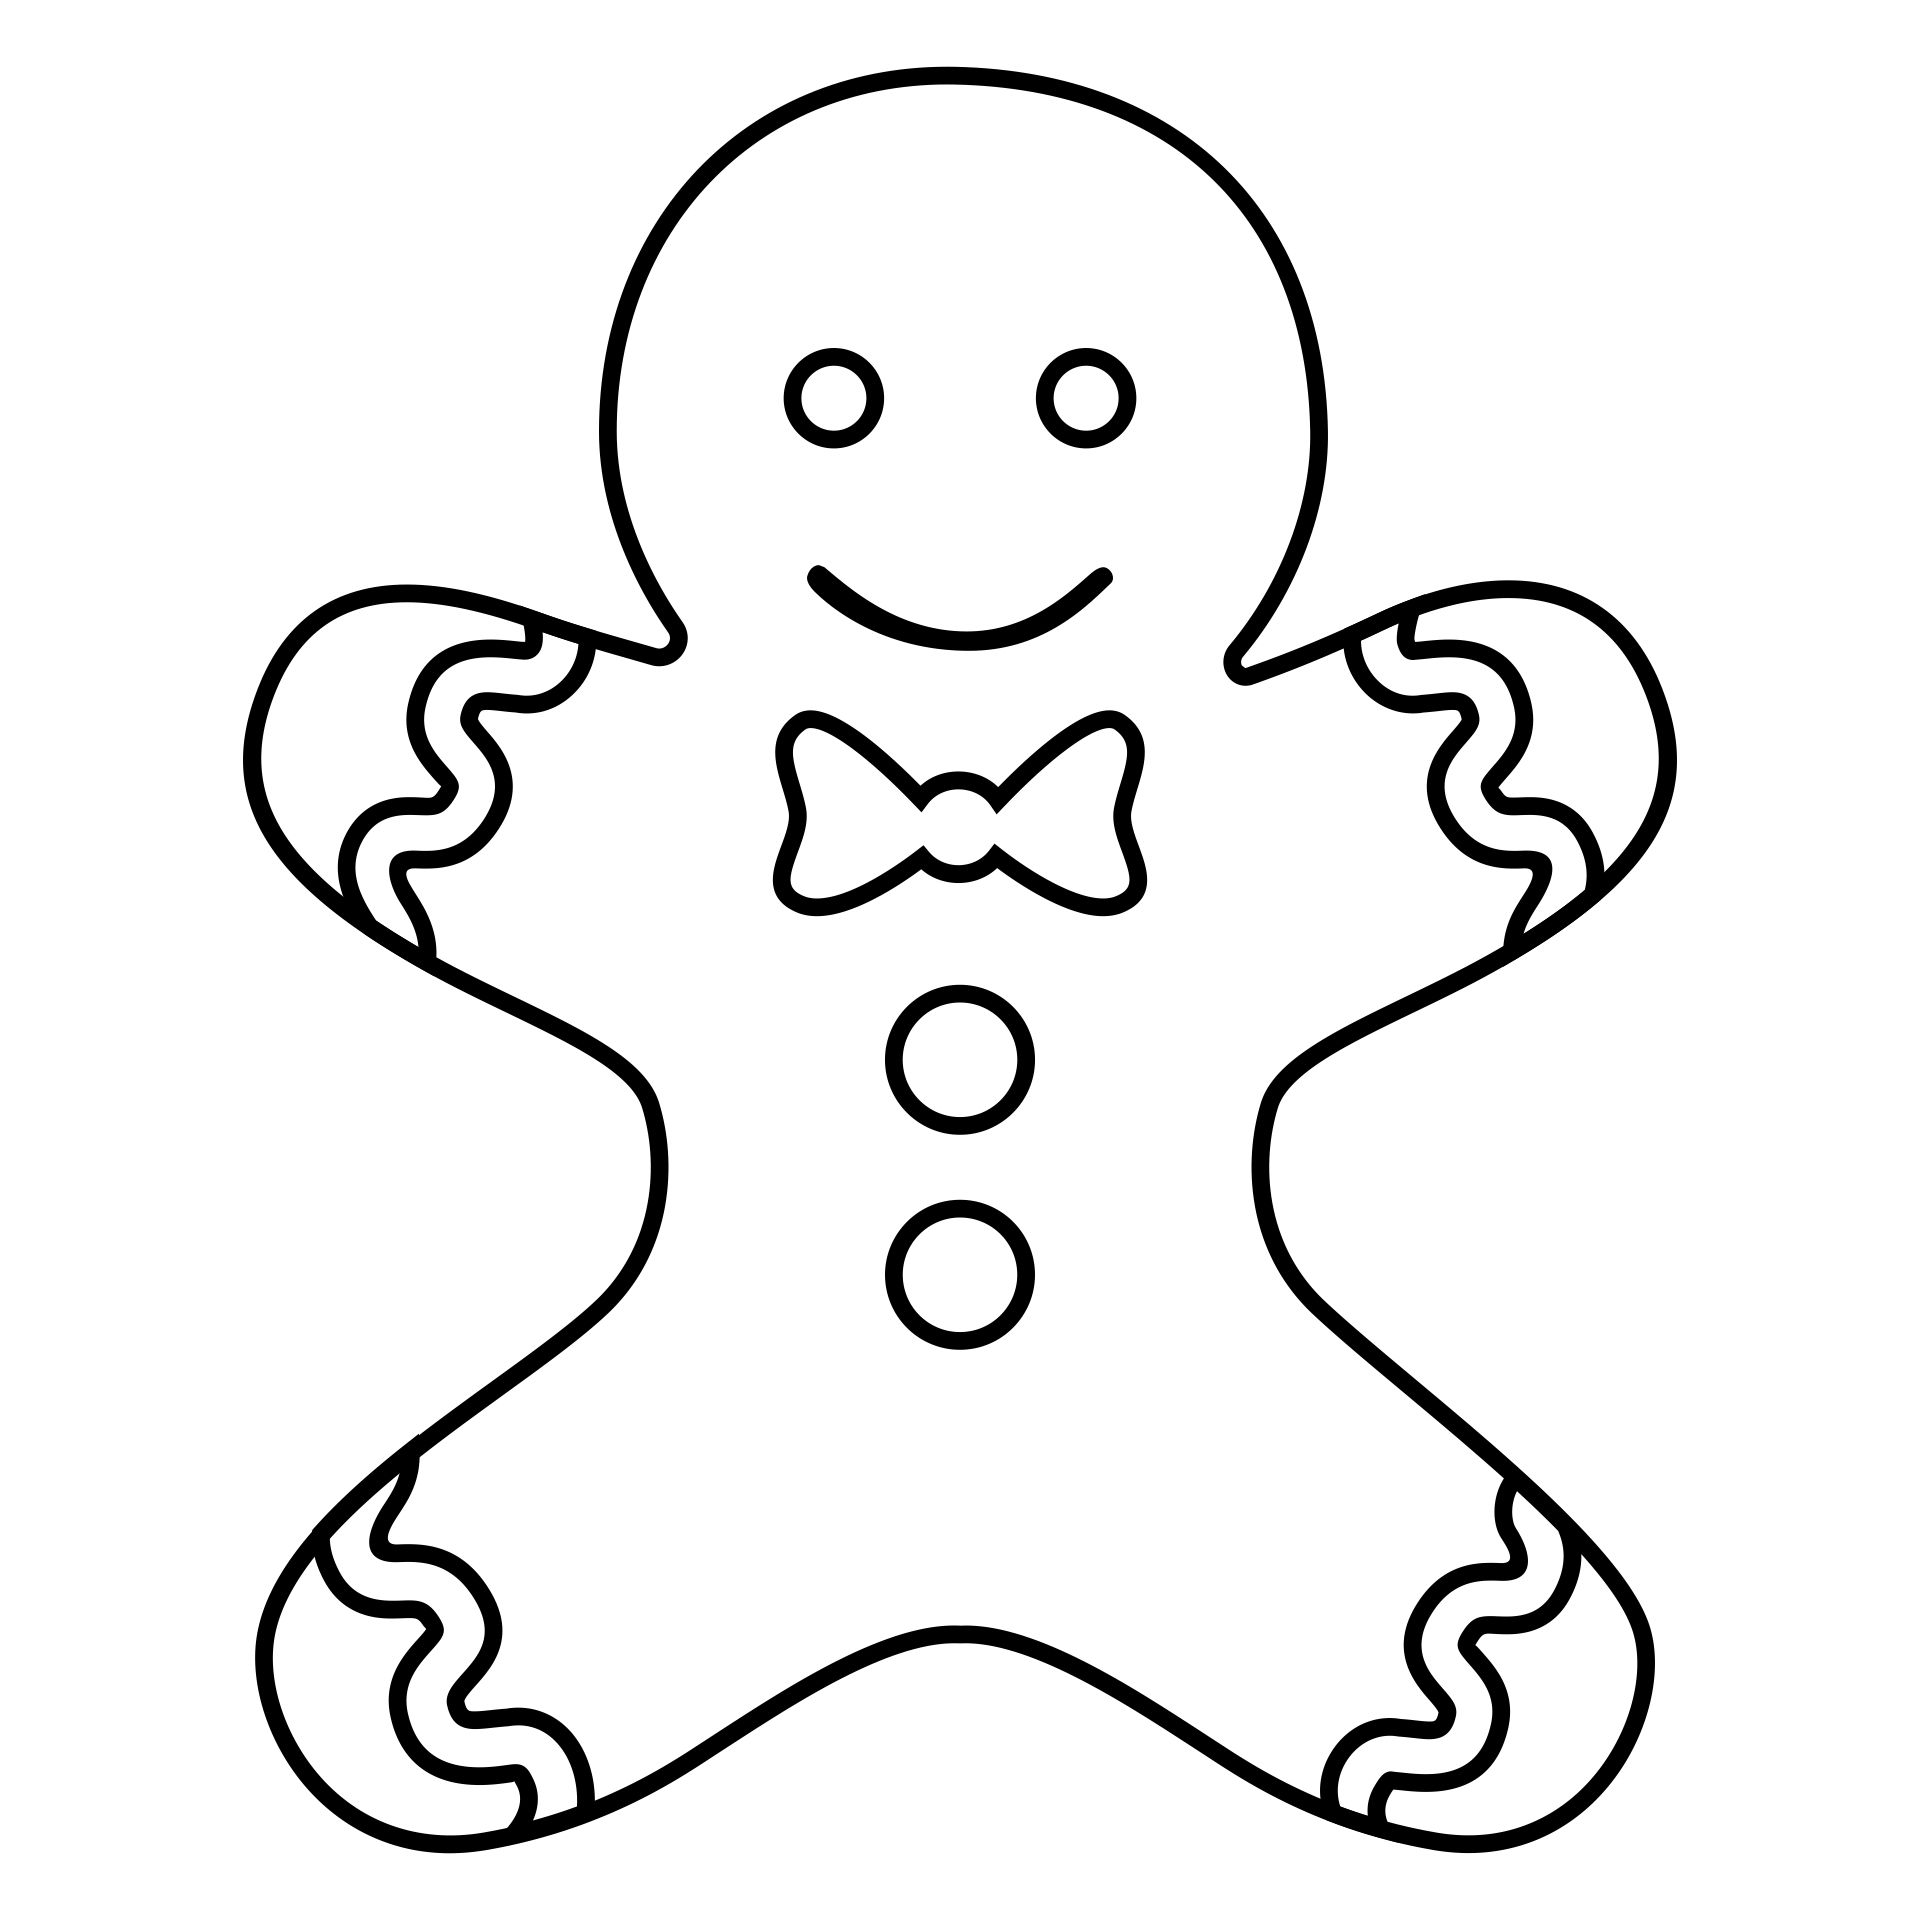 Printable Gingerbread Man Templates & Coloring Pages